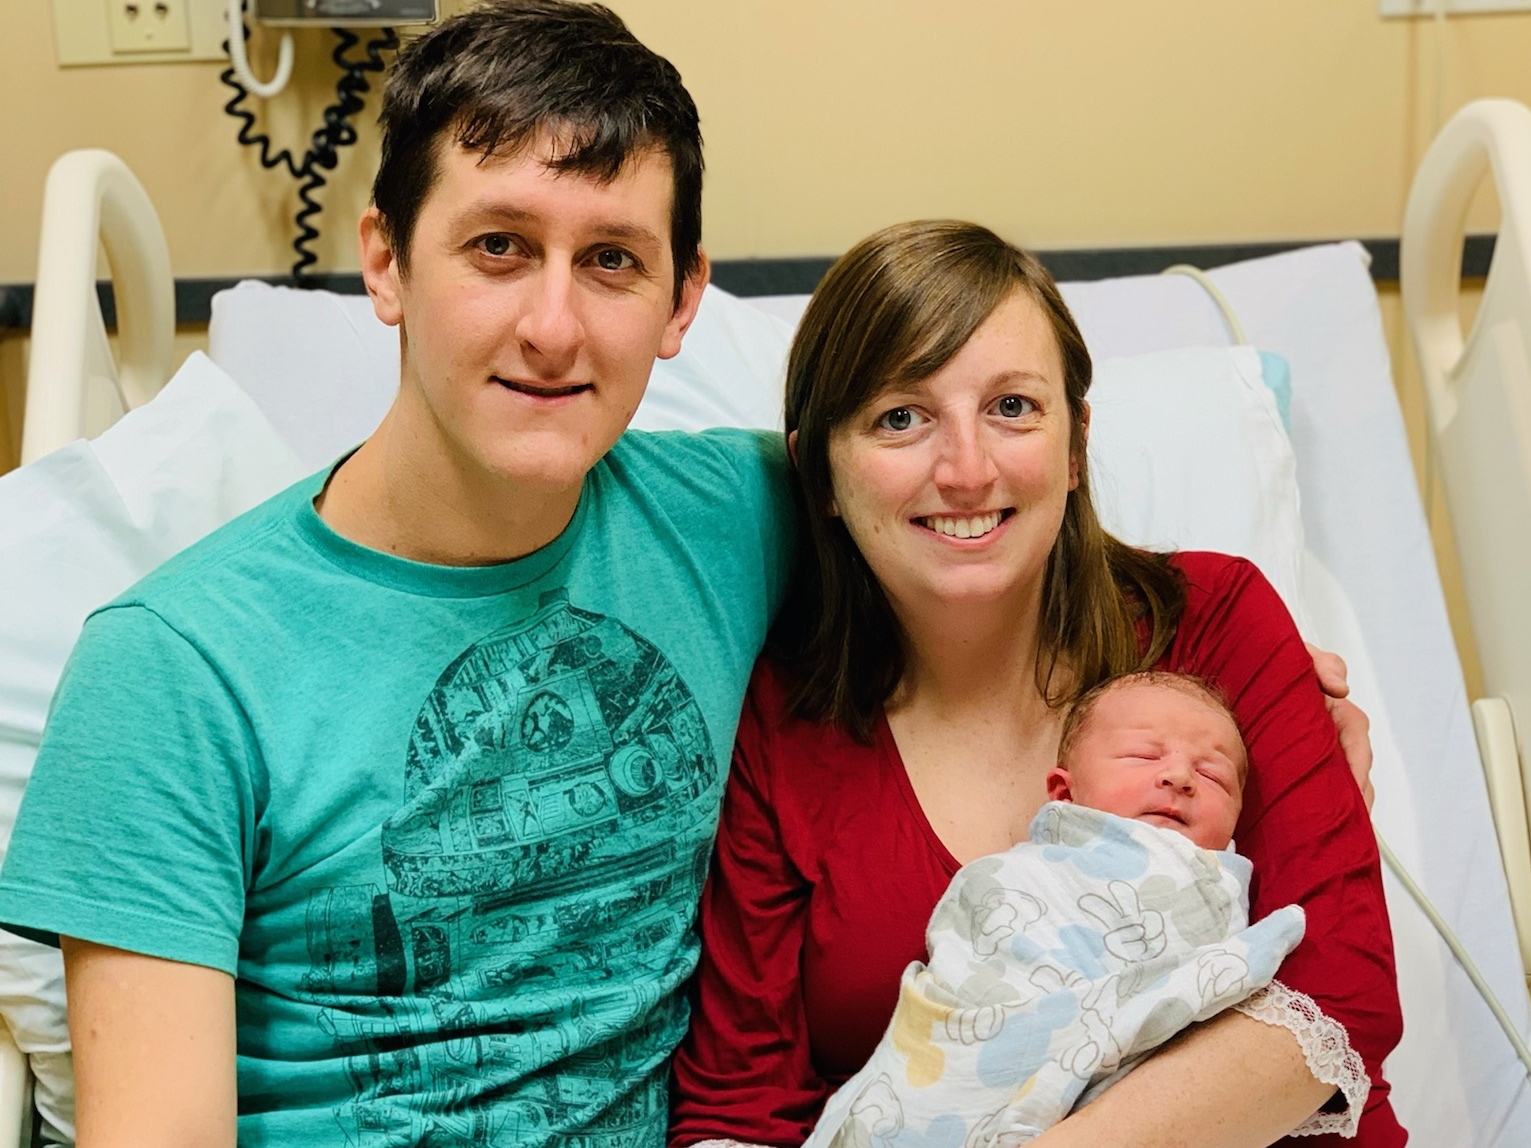 CRDMAC rings in New Year with first baby born, News